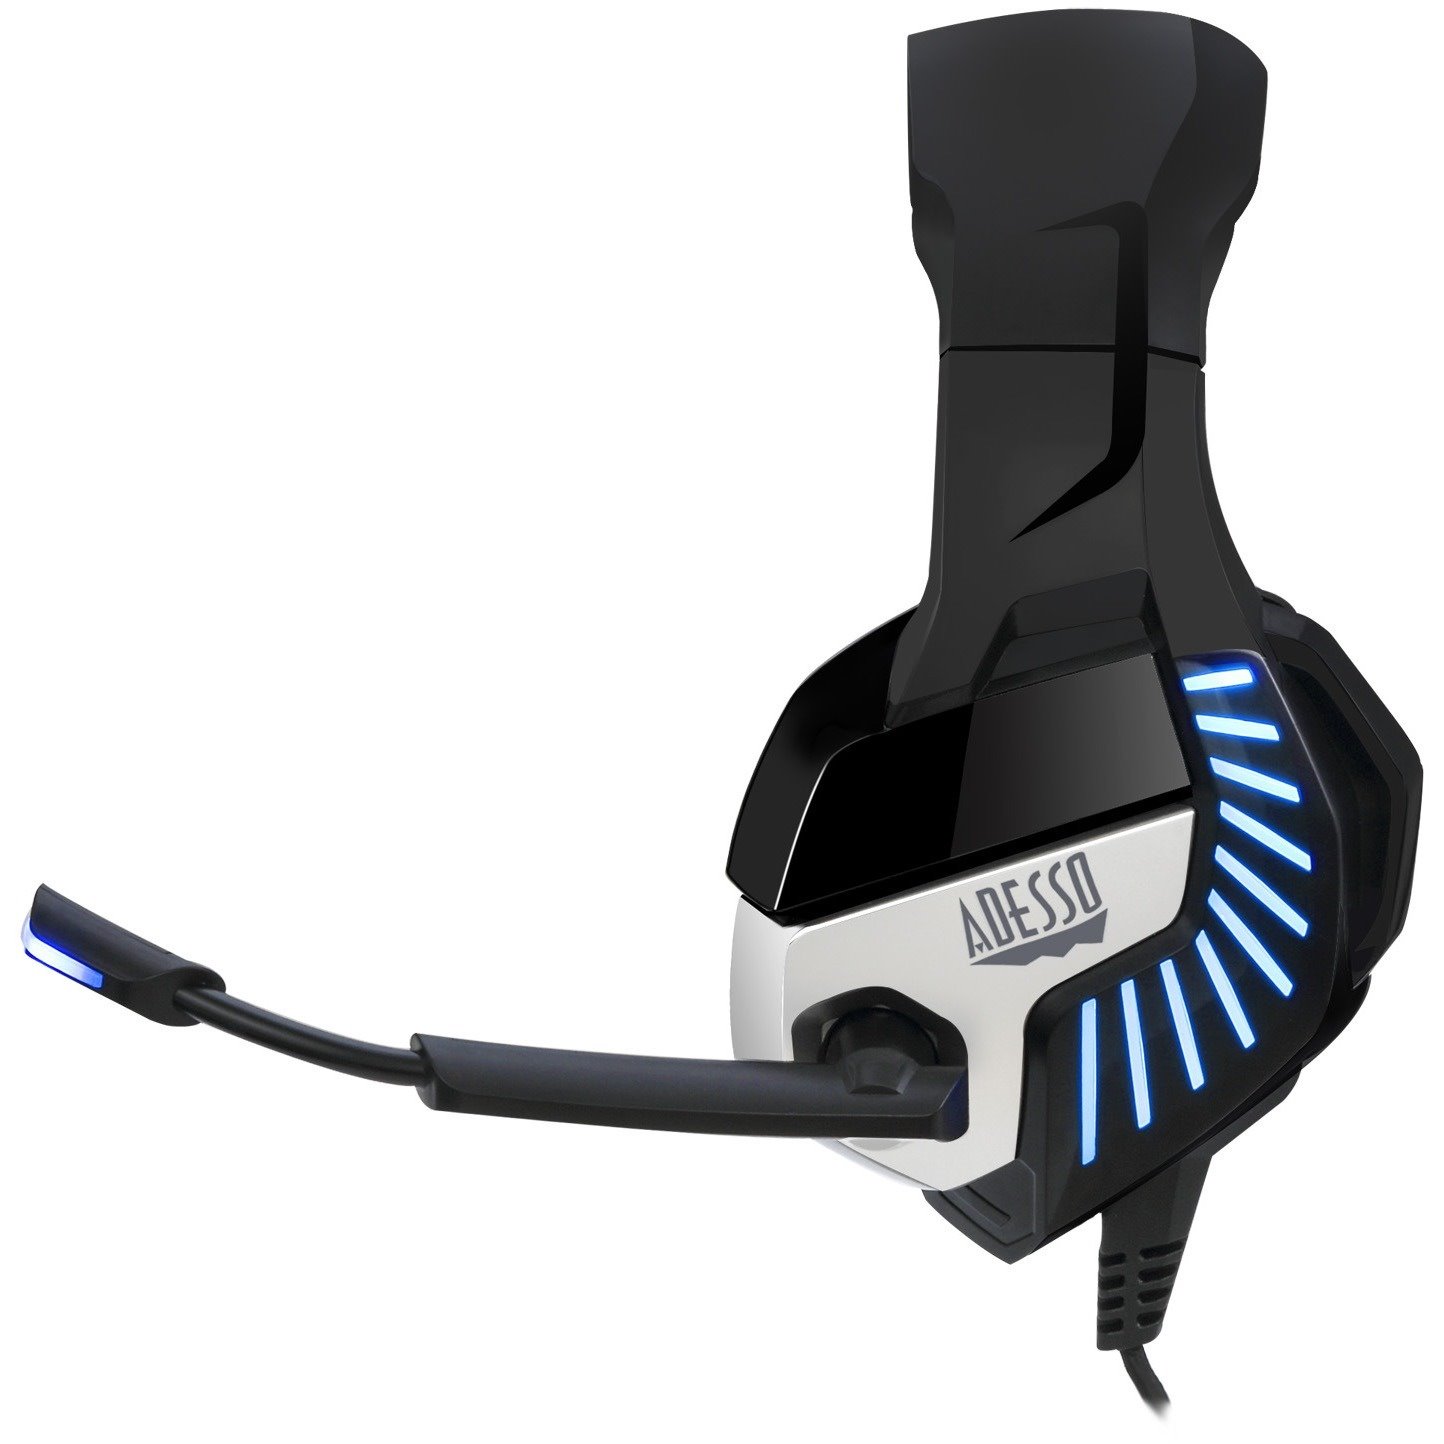 Adesso Virtual 7.1 Surround Sound Gaming Headset with Vibration